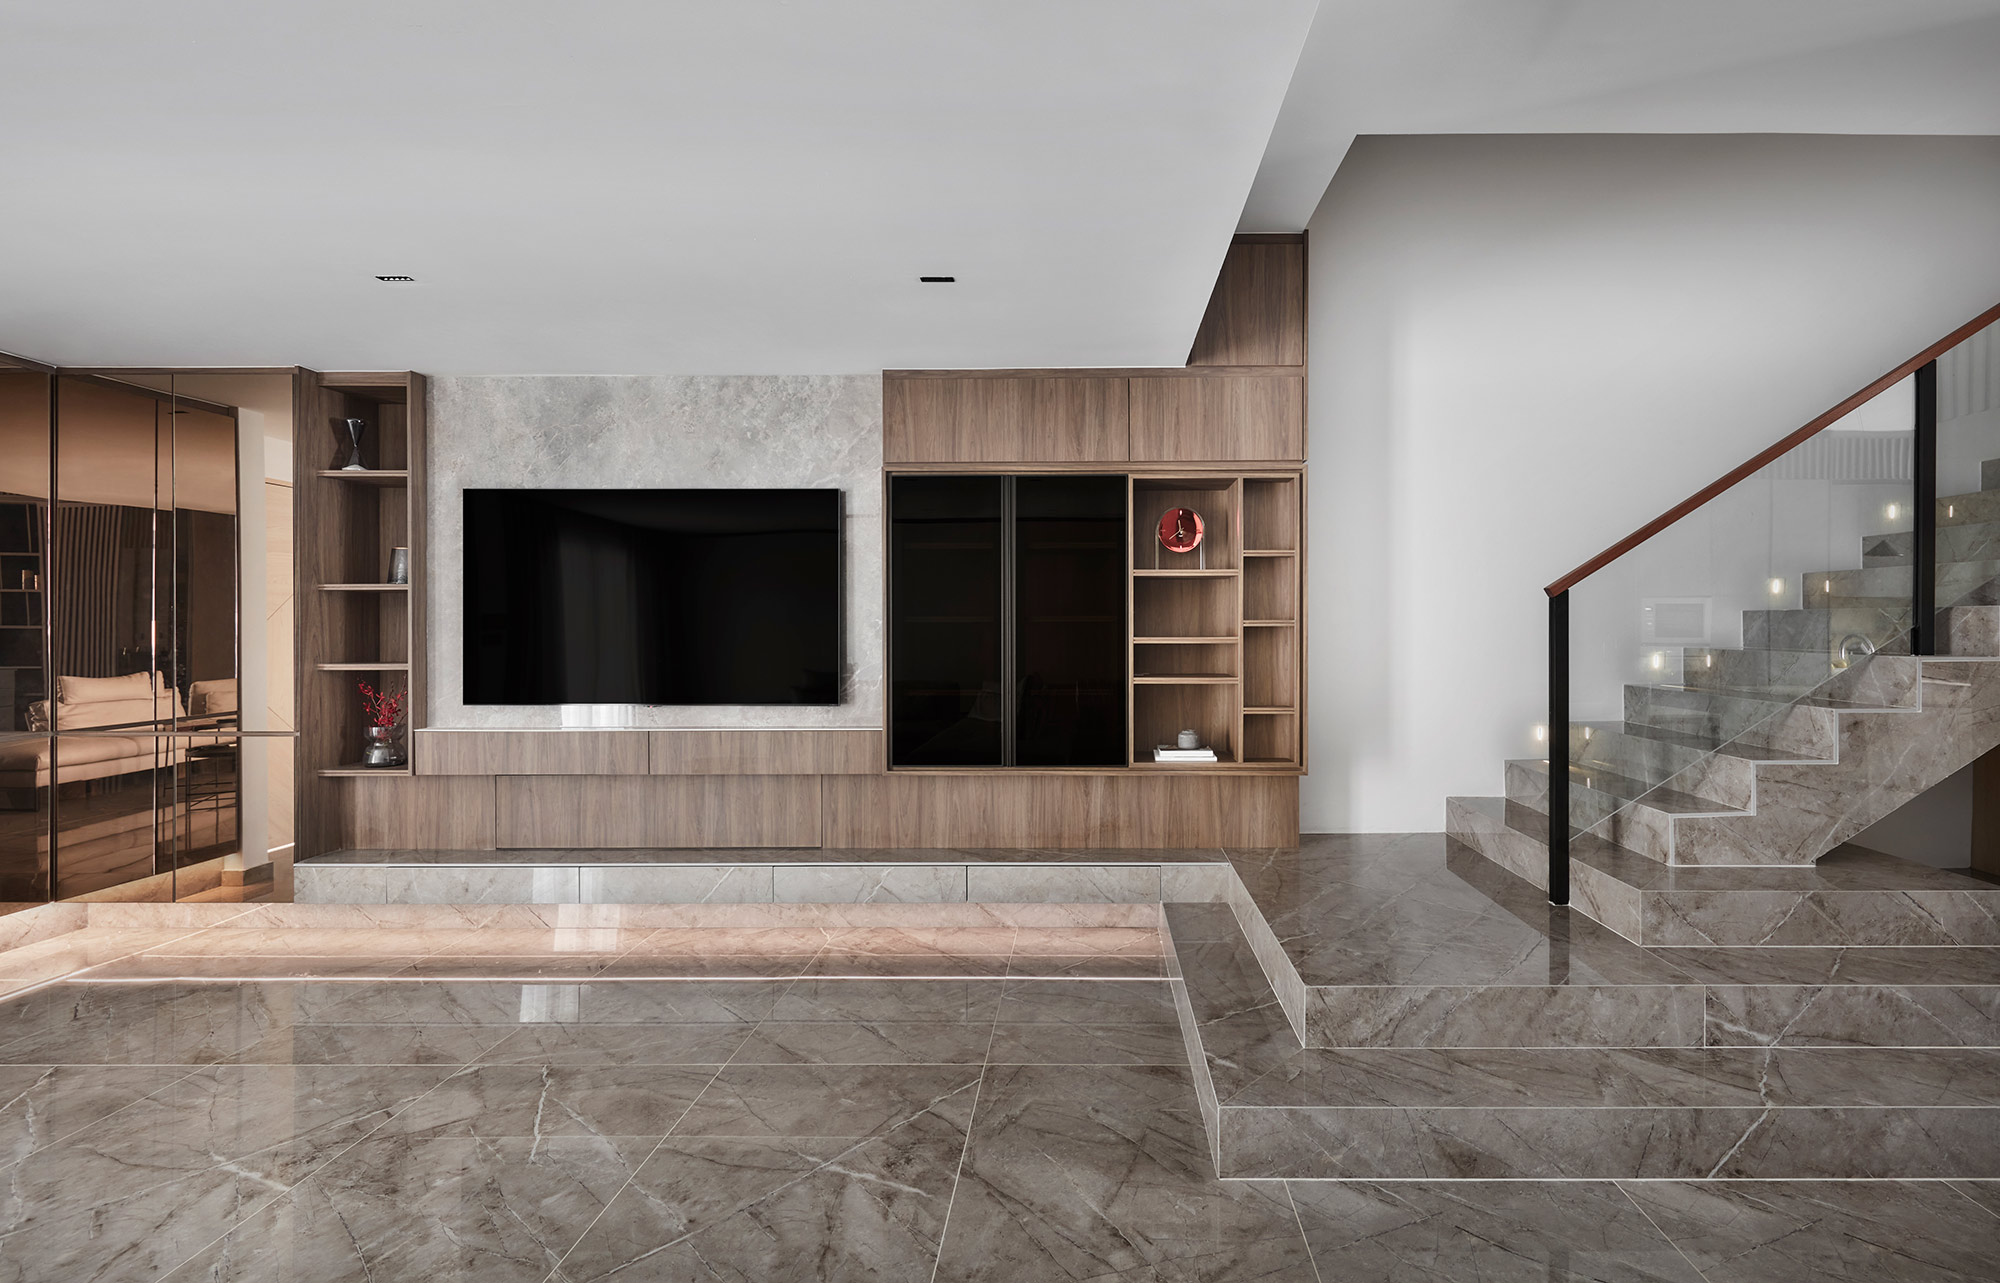 Image of Residential Home by Design Zage 4 1 in A minimalist, sculptural and unique kitchen thanks to Sensa natural stone - Cosentino